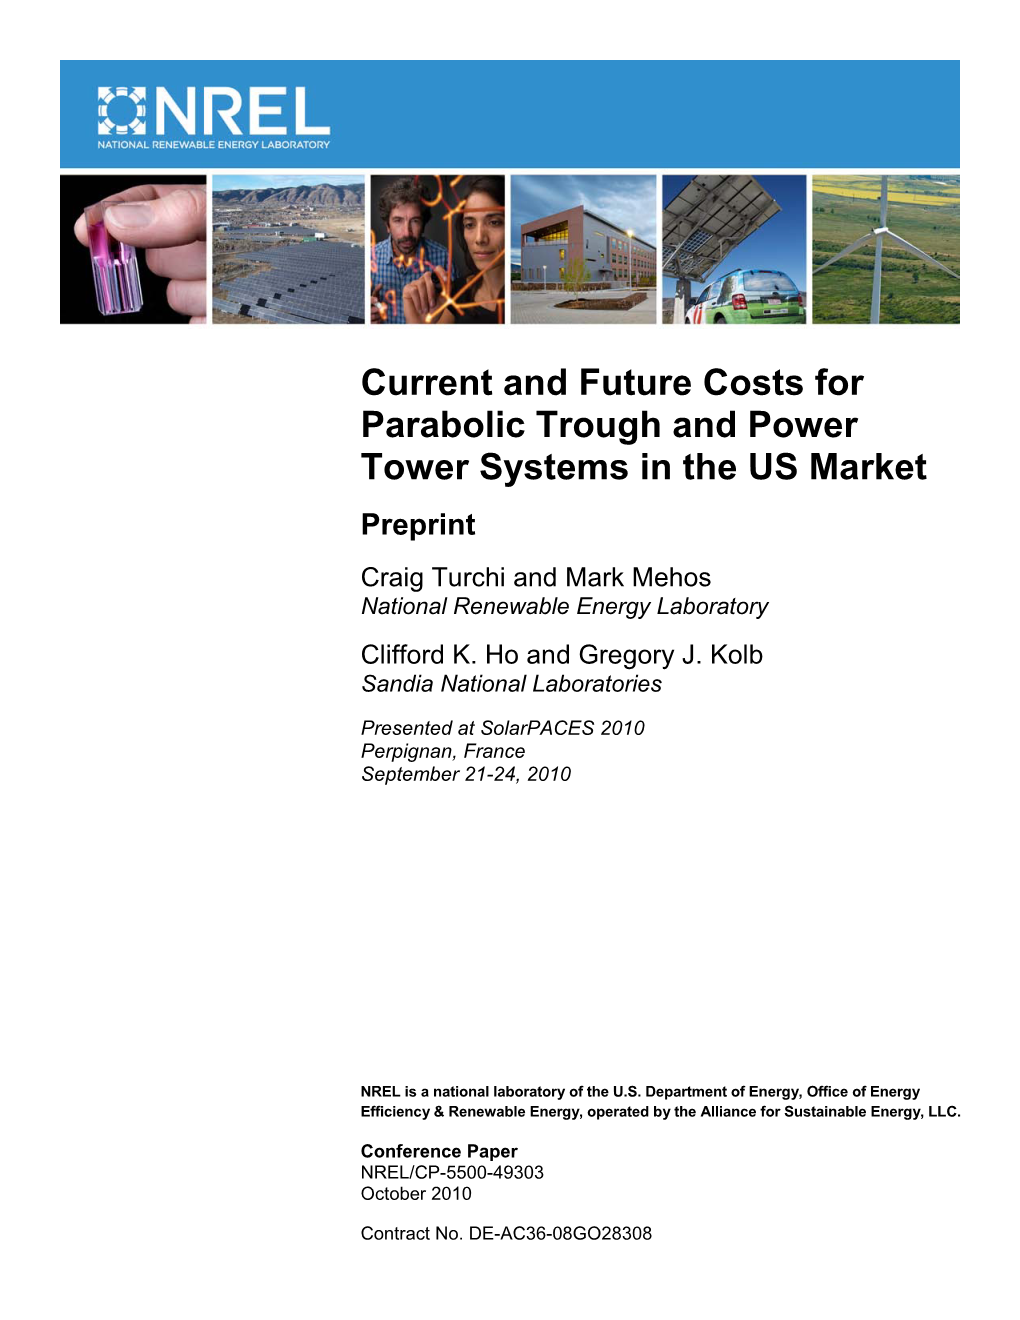 Current and Future Costs for Parabolic Trough and Power Tower Systems